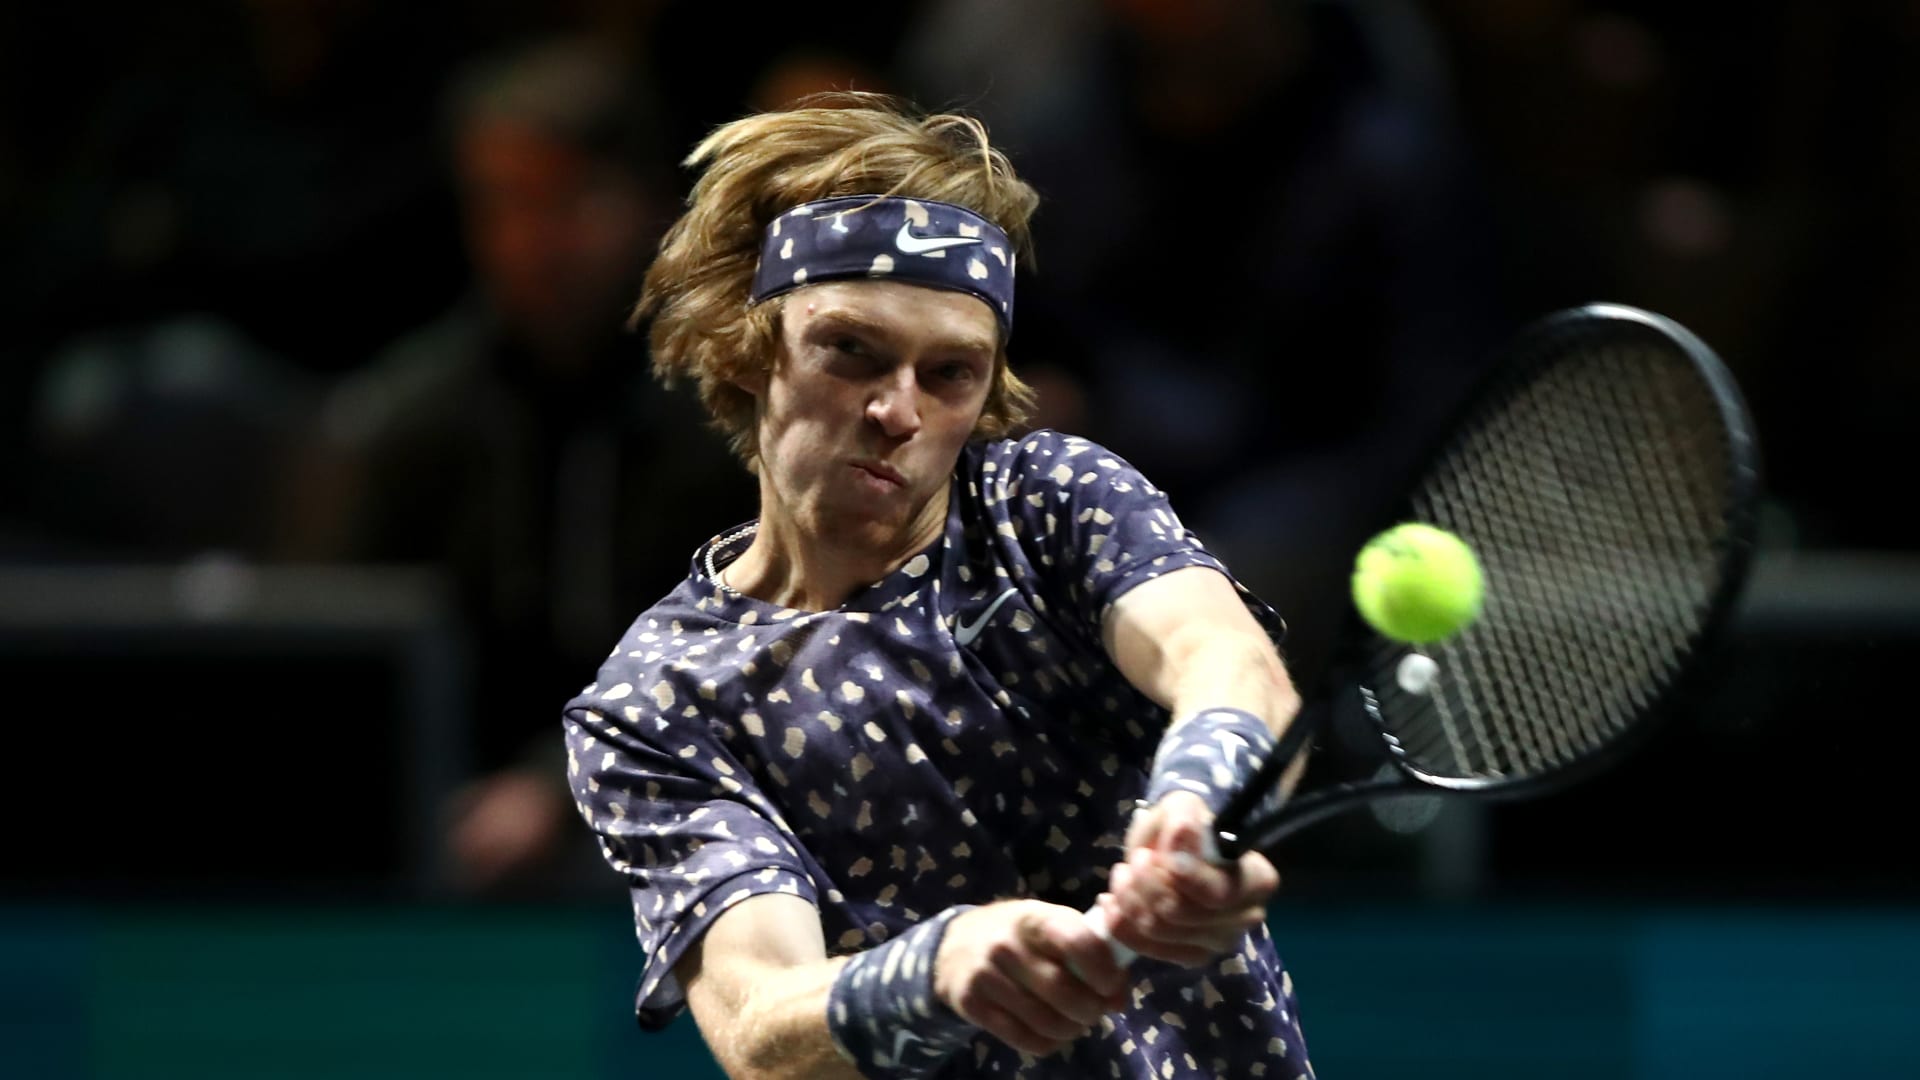 Rublev talks cats, hair, One Direction in Reddit AMA